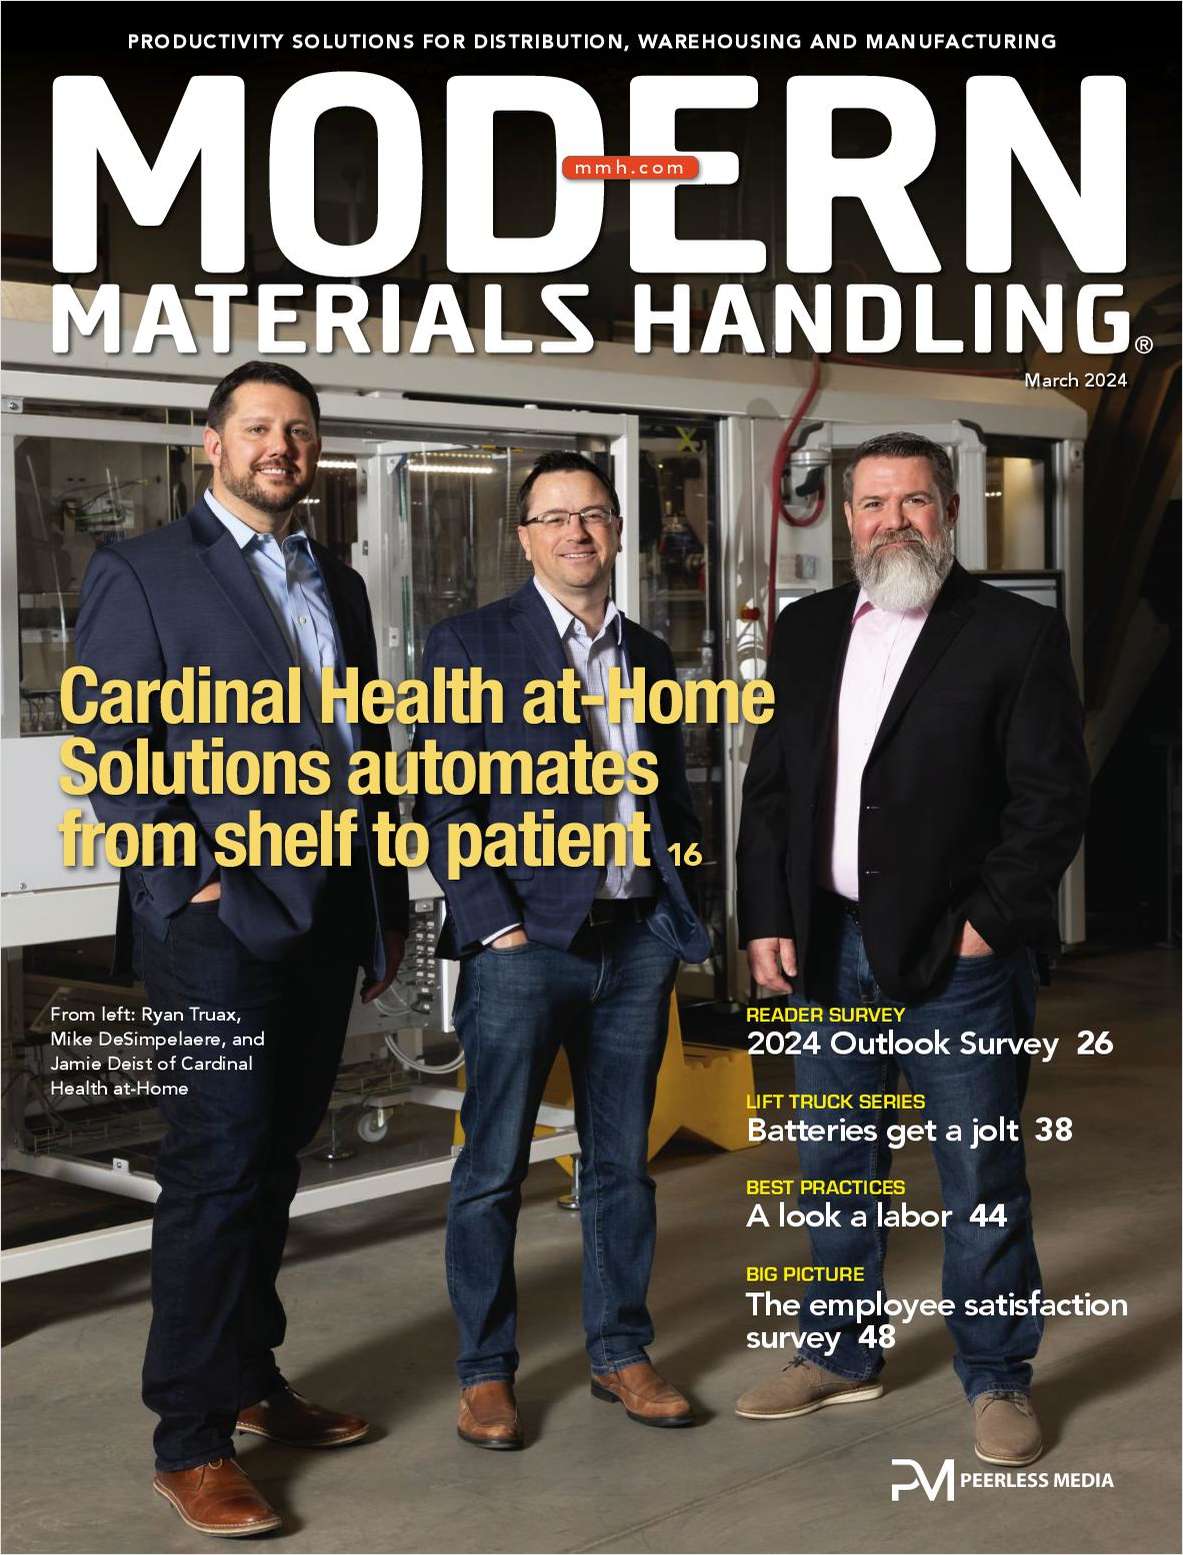 Modern Materials Handling: Cardinal Health at-Home Solutions automates from shelf to patient